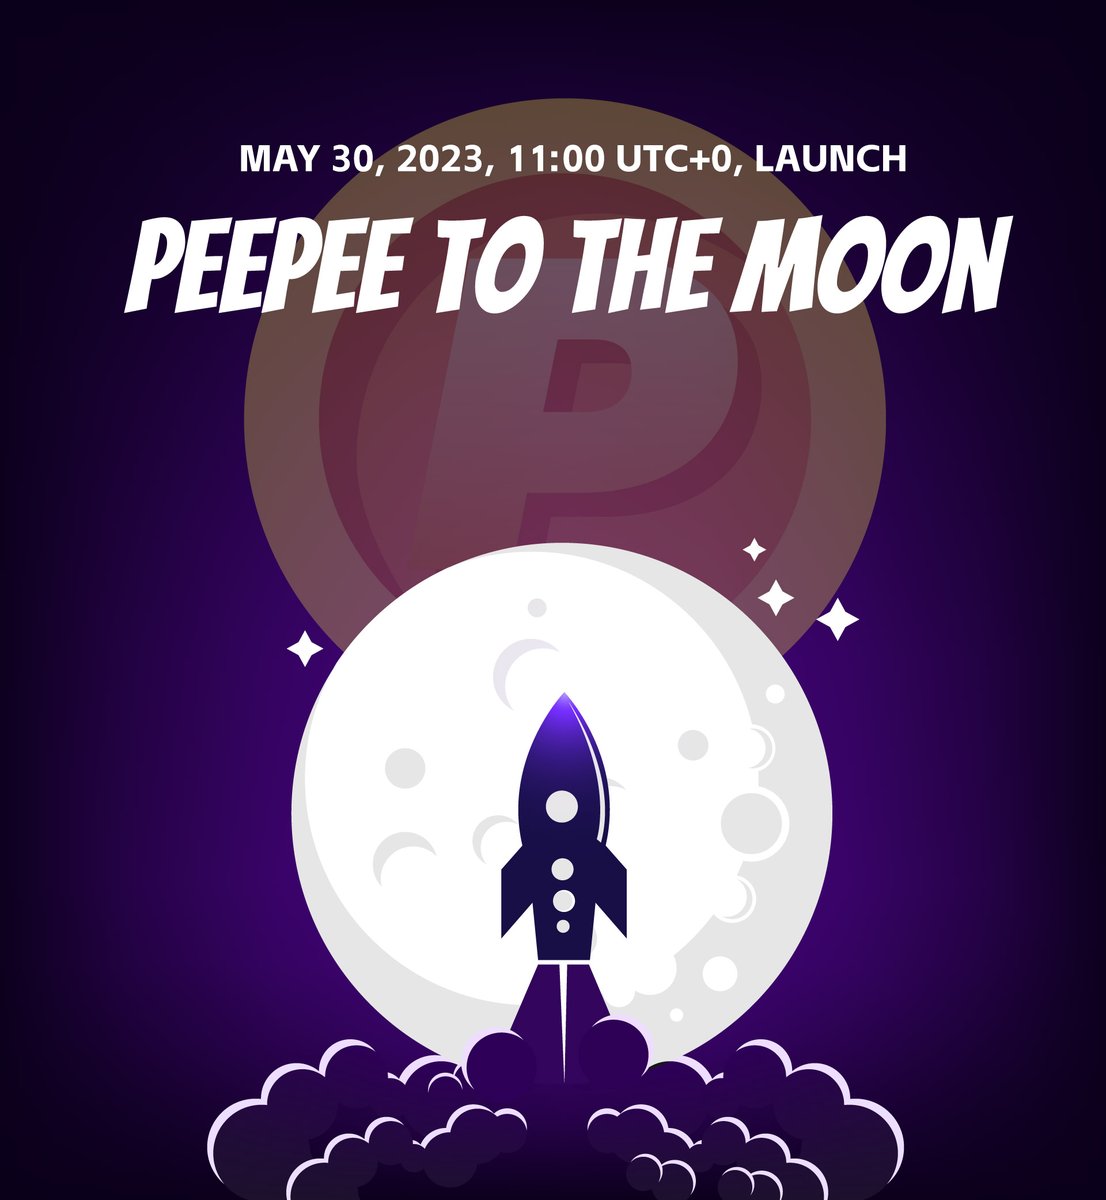 PeePee is here, the next legend of the crypto world.
🔥🔥🔥🚀🚀🚀🚀🚀
May 30, 2023, 11:00 UTC+0, LAUNCH.
#MEMEcoin  #PeePee #pepe #SHIB #Getrich #Makemoney #Earncoins #10000000x